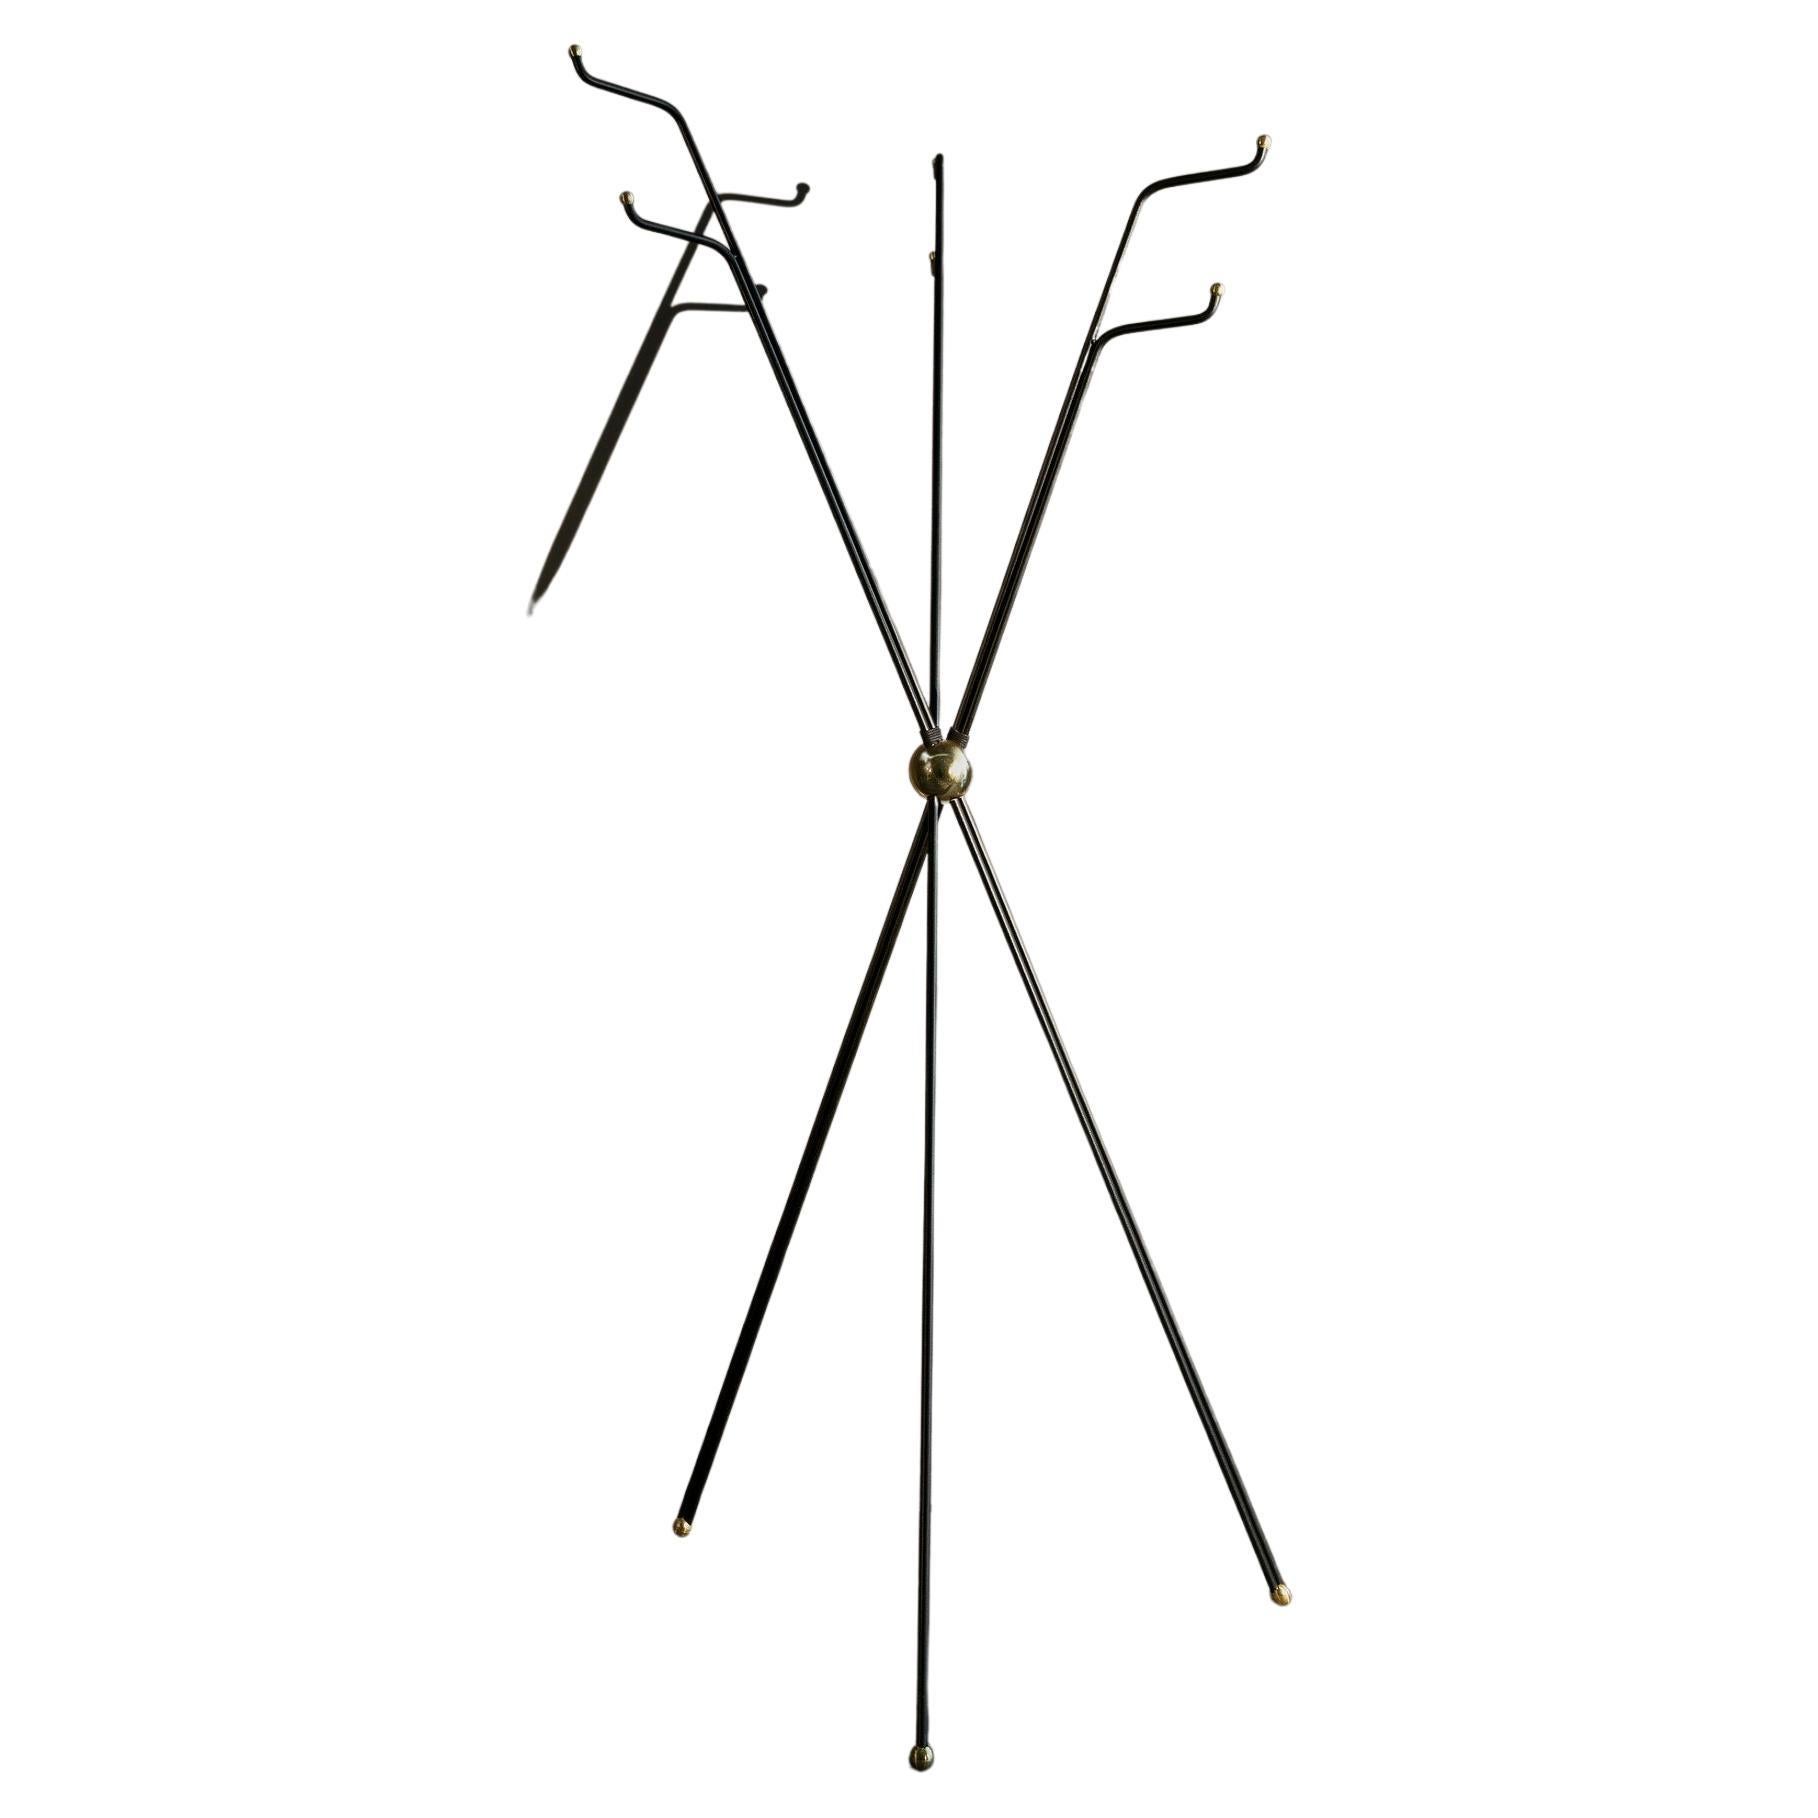 AAM_01 Coat Rack by ANDEAN, Represented by Tuleste Factory